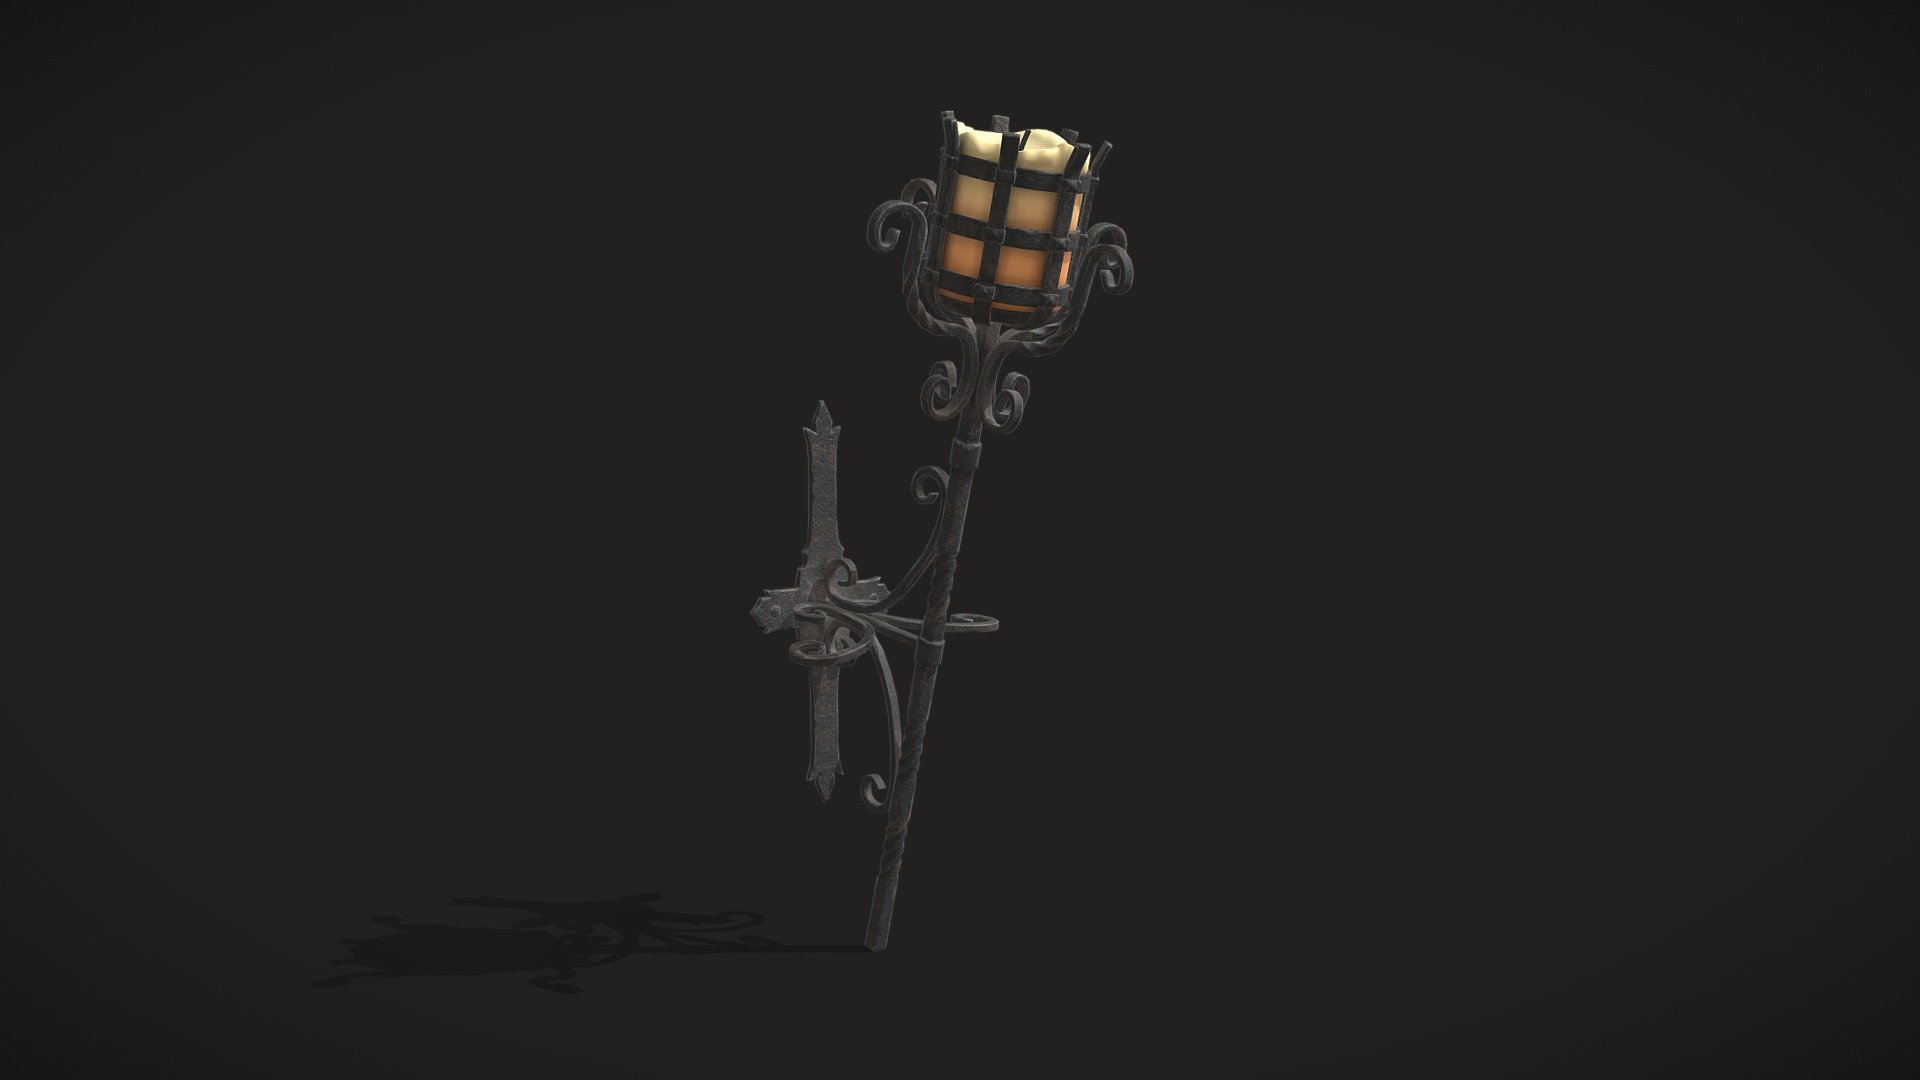 It's a lowpoly game ready 3D model of old torch holder with unwrapped UVs and PBR textures.

Includes the following 3d file types: Obj, Fbx.

Textures set includes:




PBR Metal Roughness: BaseColor, Roughness, Metallic, Normal, Normal OpenGL, AO.

Unity: AlbedoTransparency, MetallicSmoothness, Normal, AO.

Unreal Engine 4: BaseColor, OcclusionRoughnessMetallic, Normal.

Textures resolution: 2048x2048px. Textures format: Targa.

Polygon Count: 5,242. Verts: 2,782.

Real world scaled. Units: cm 3d model